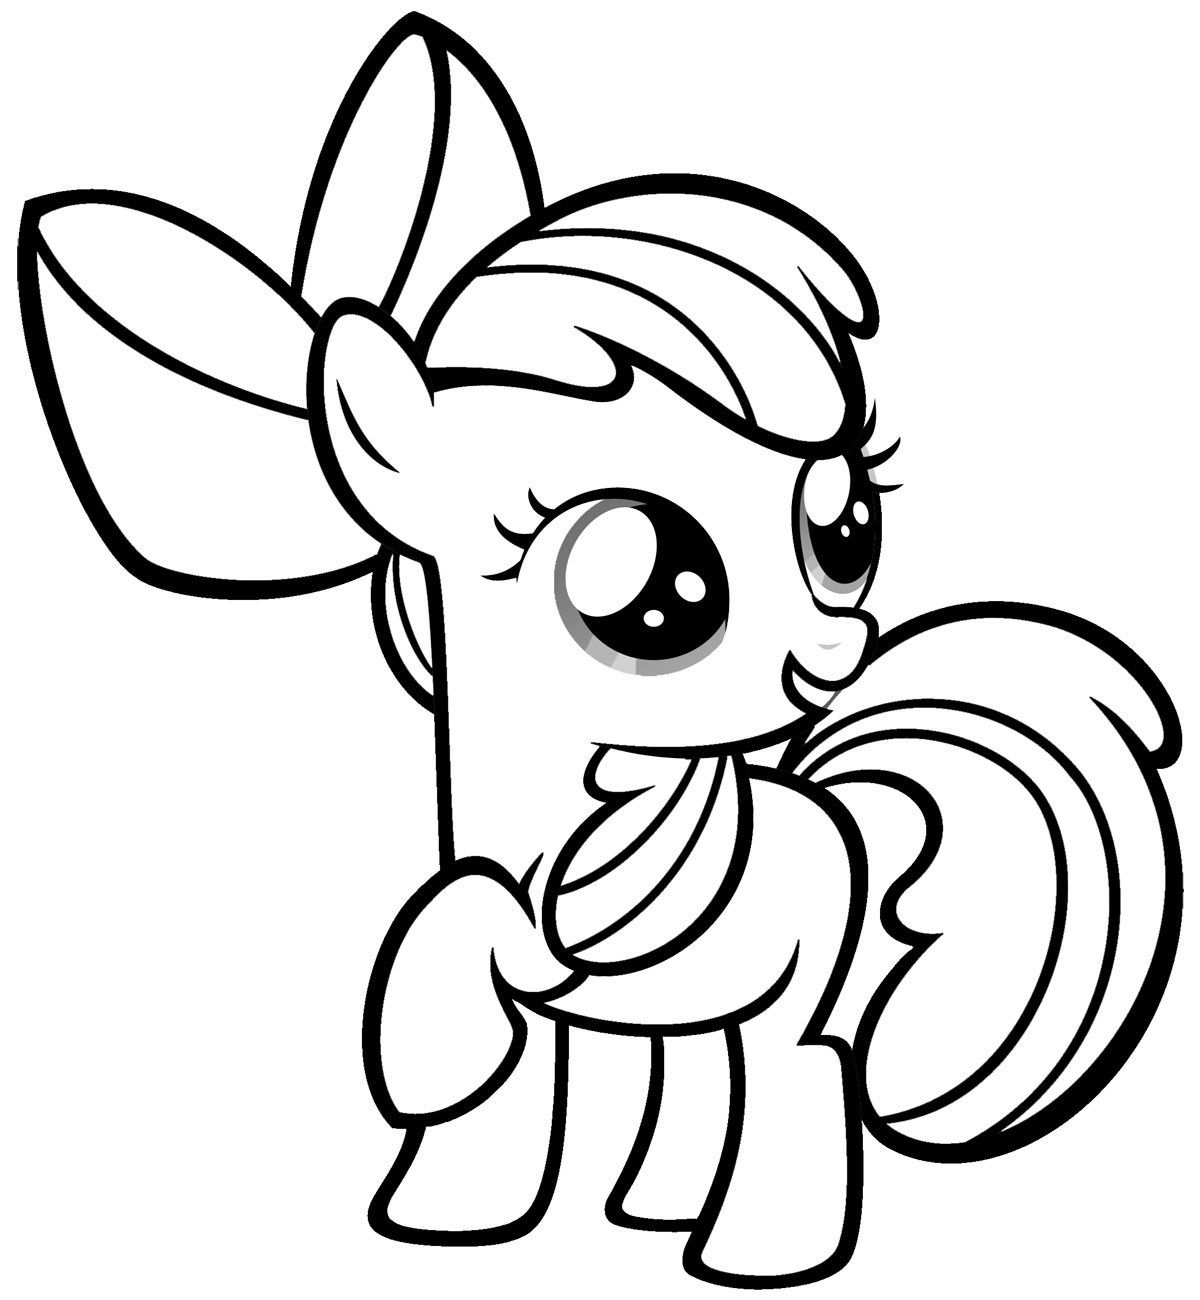 Cute Little Pony Coloring Page   Free Printable Coloring Pages for ...